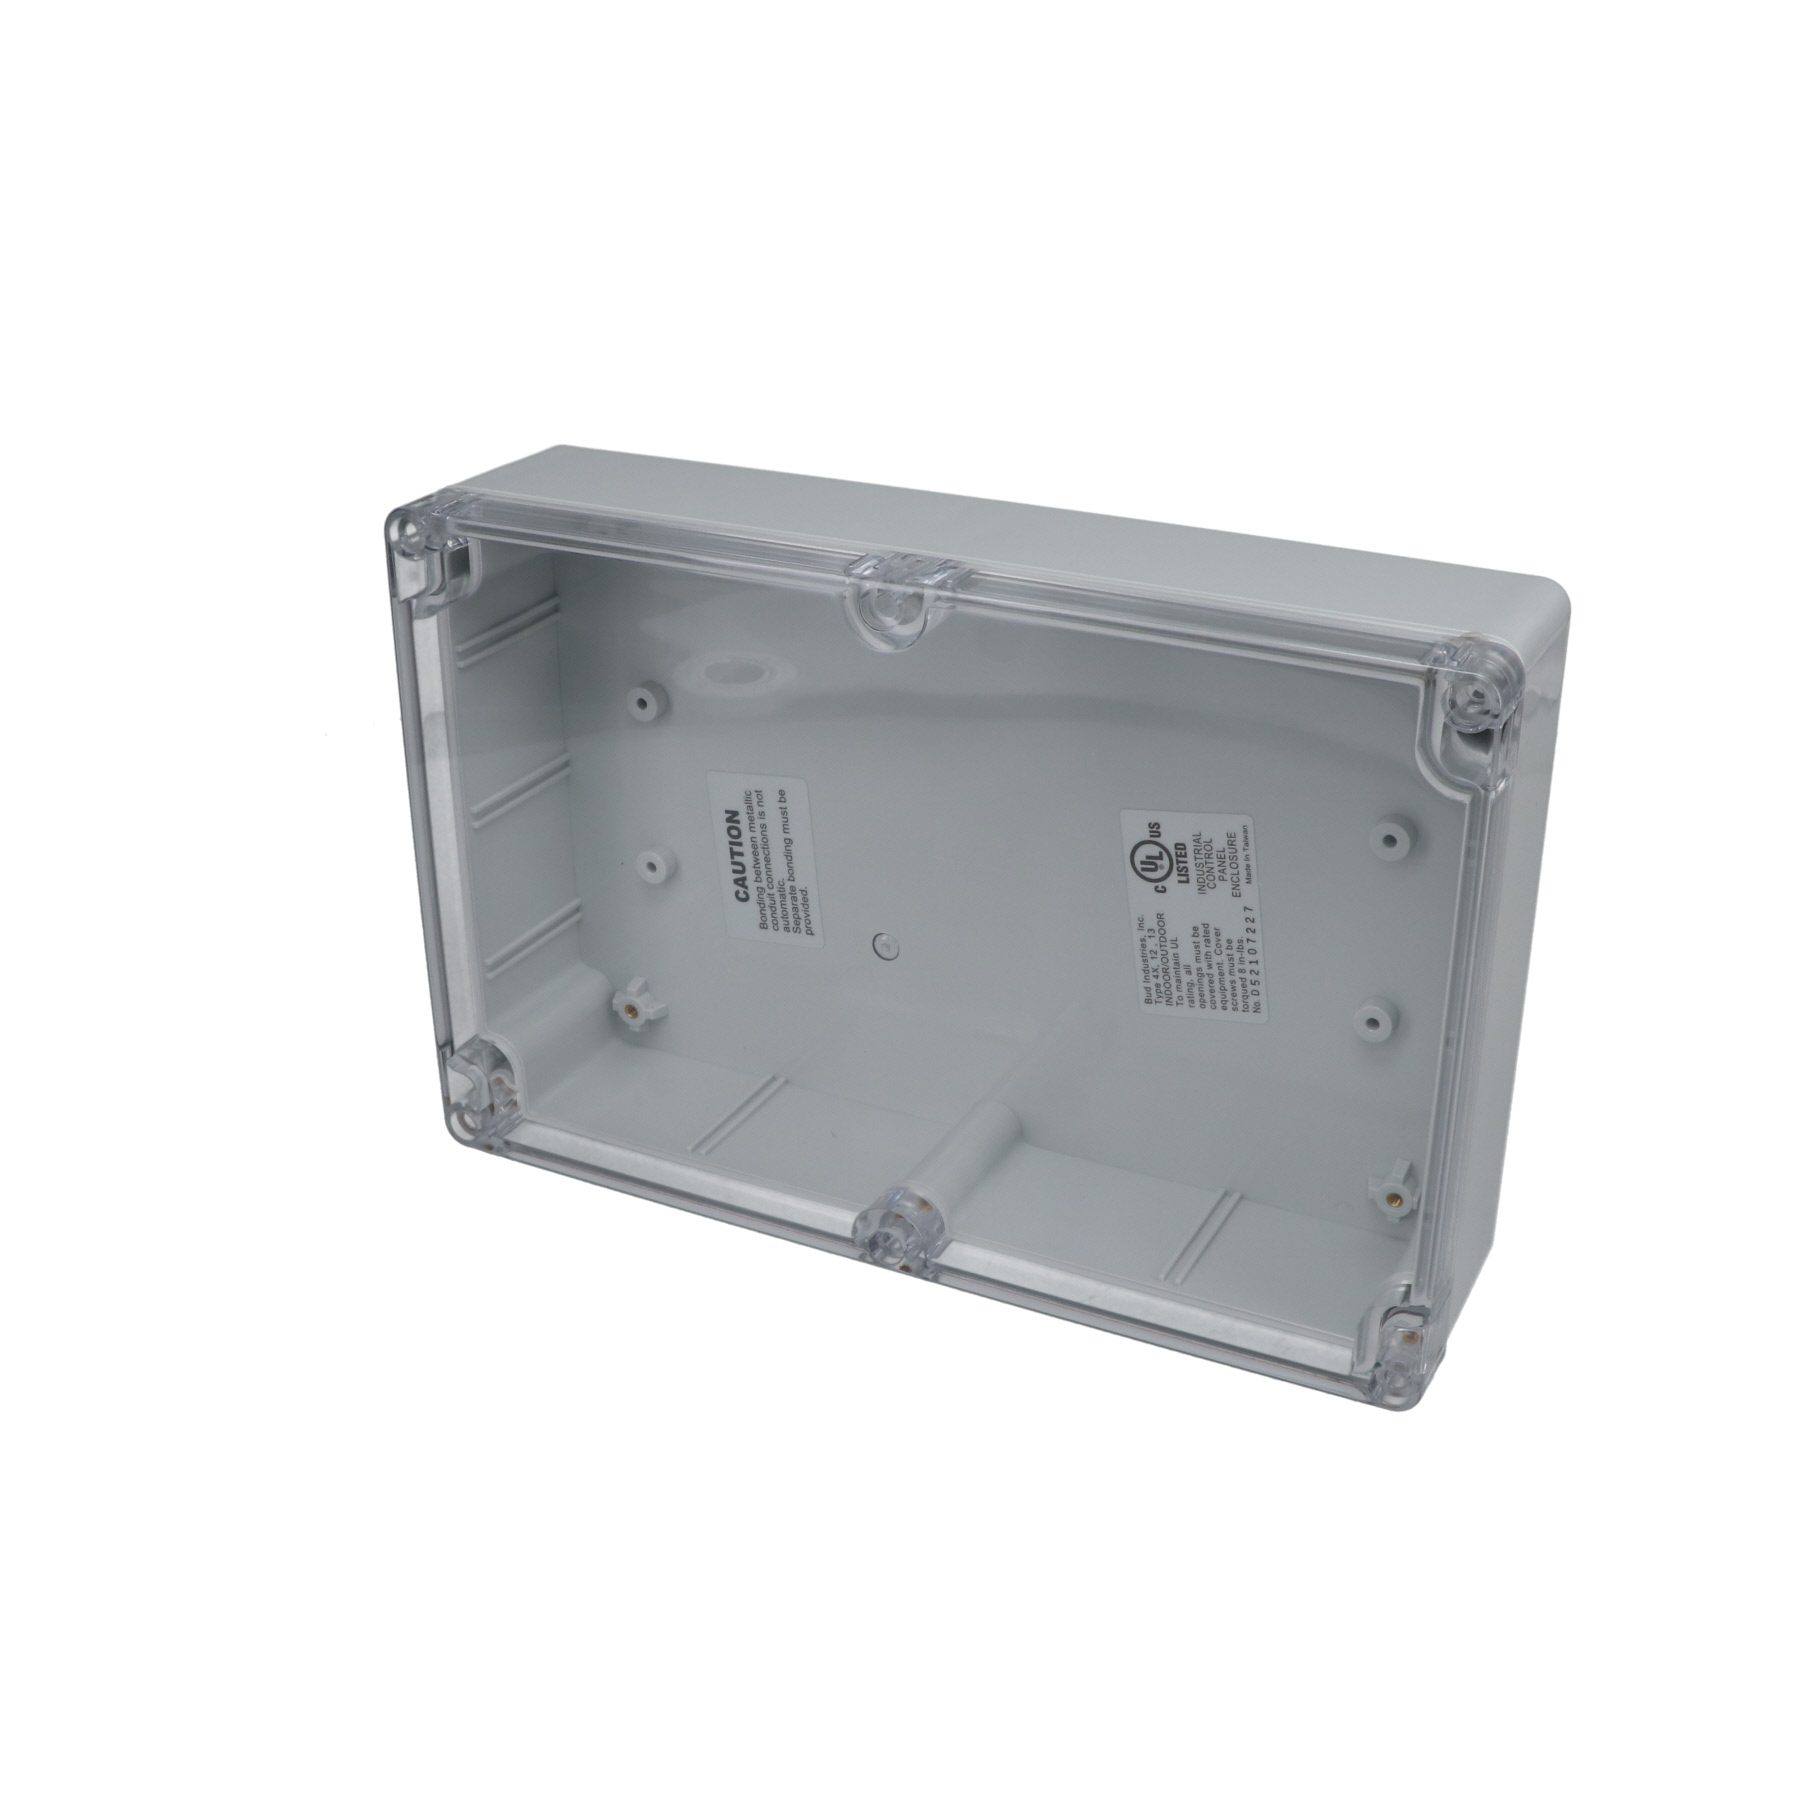 IP65 NEMA 4X Box with Clear Cover PN-1325-C